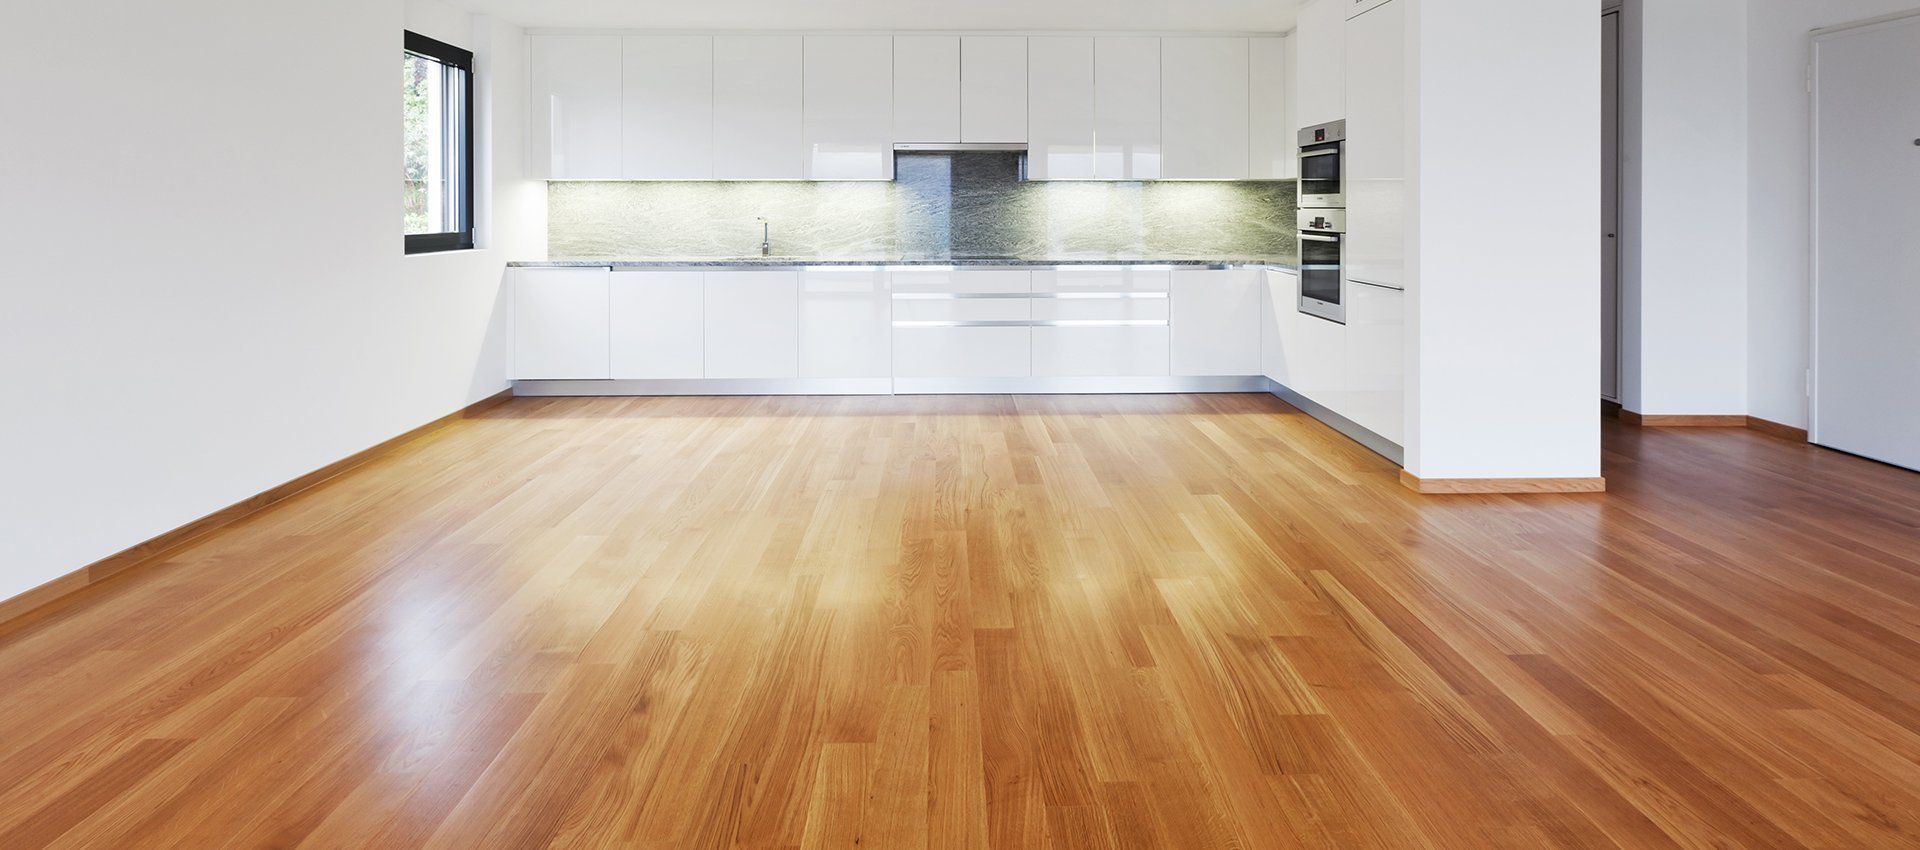 wooden flooring and skirting in kitchen